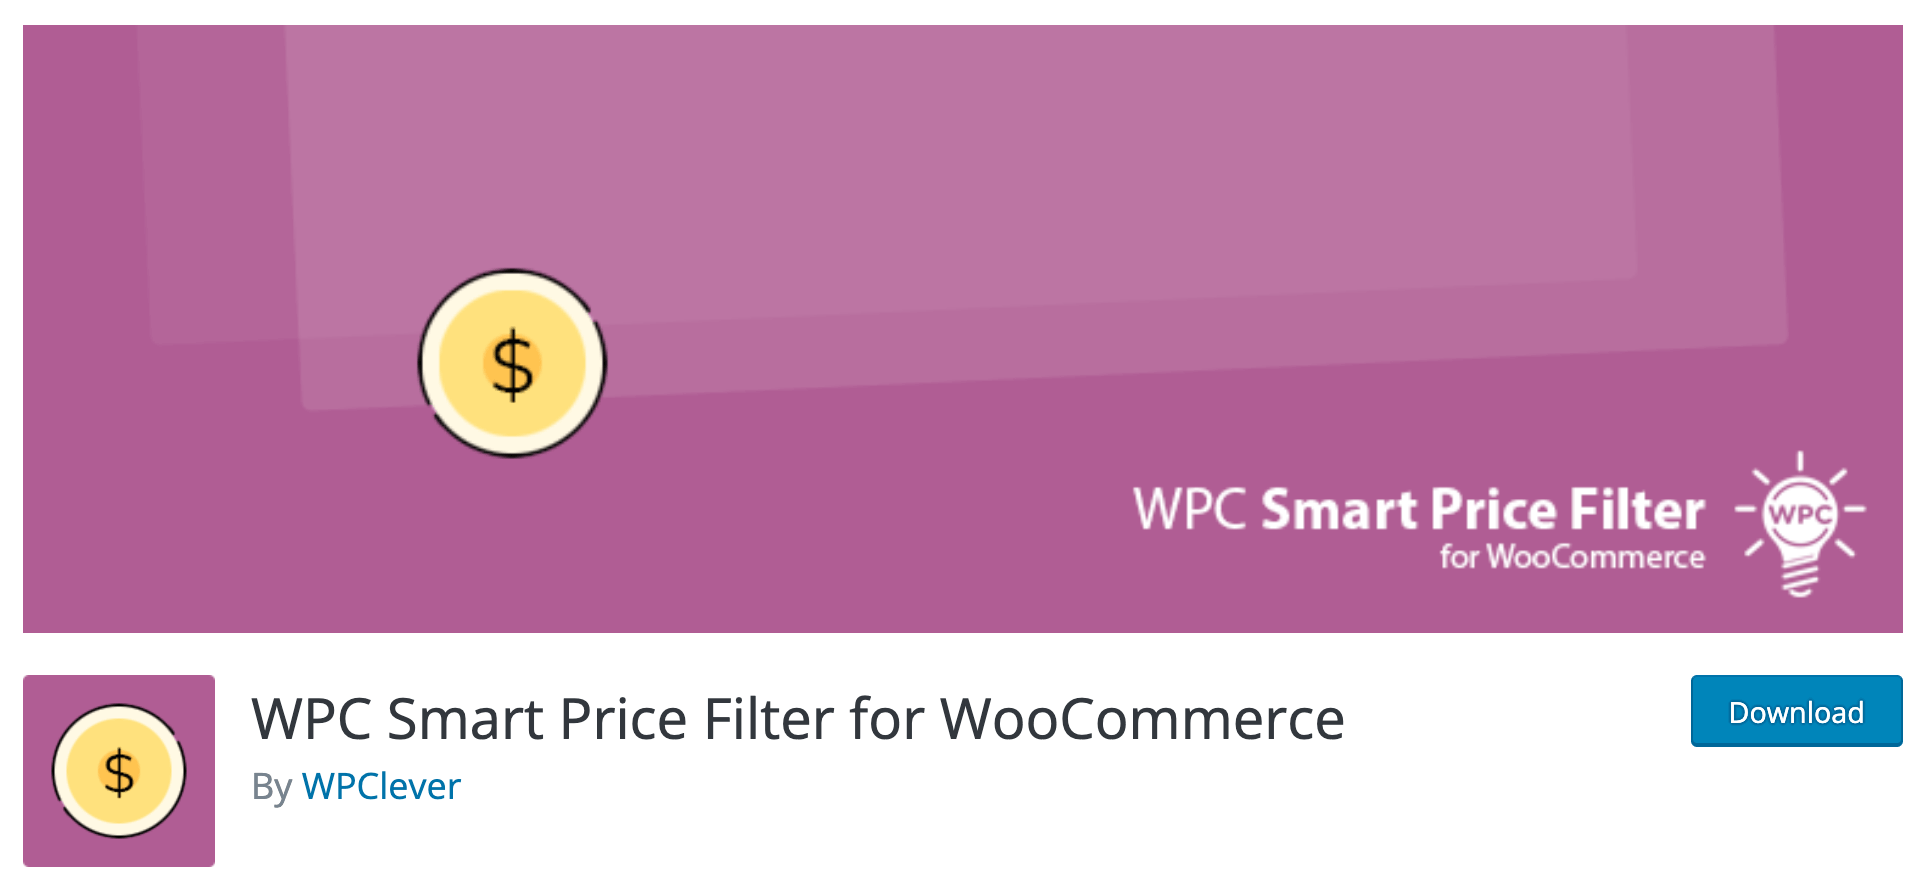 WPC Smart Price Filter for WooCommerce